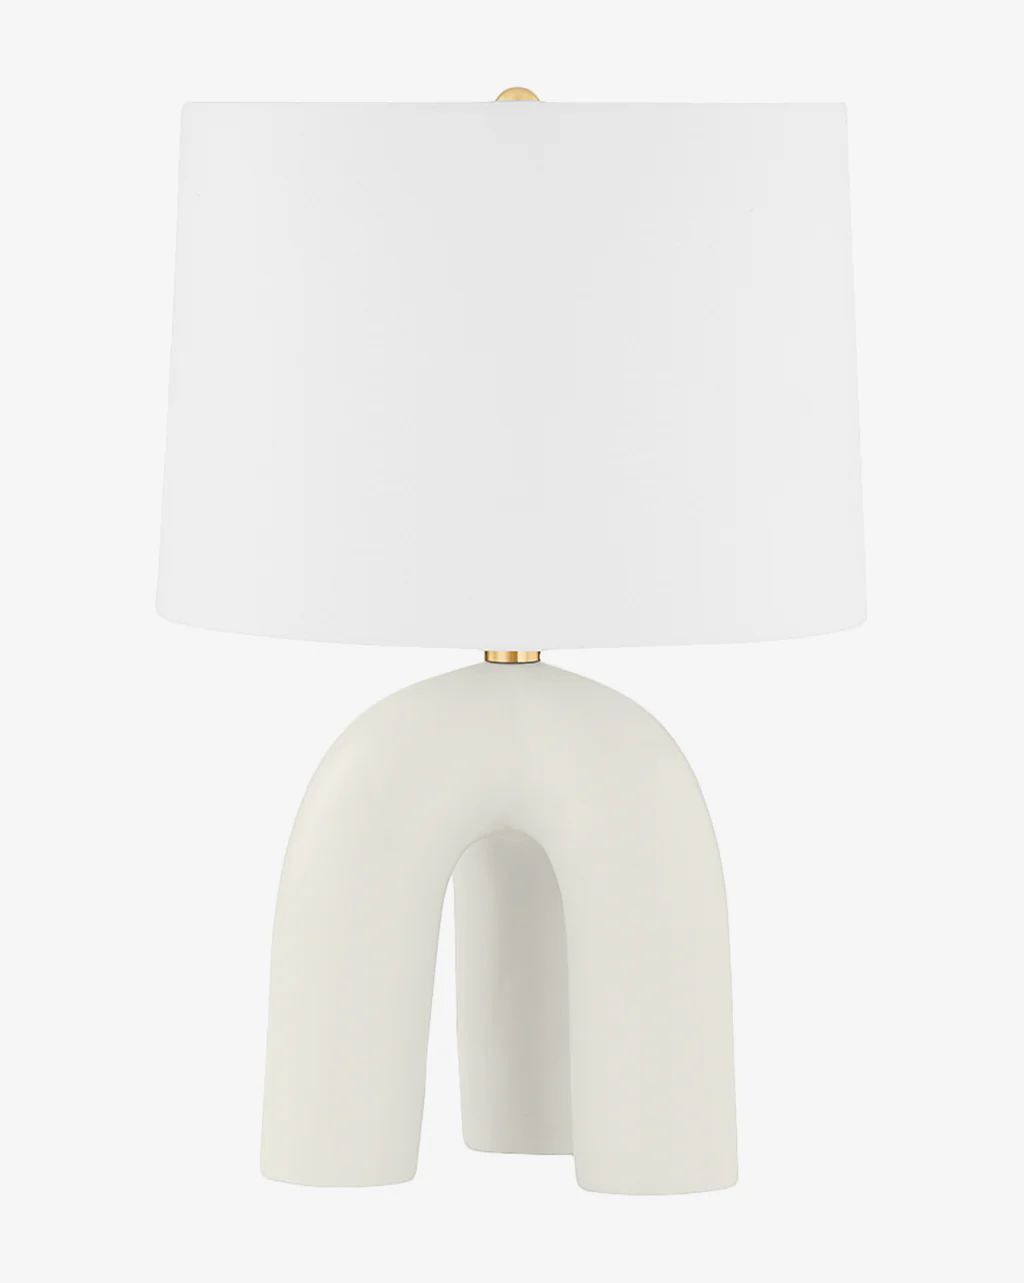 Mills Pond Table Lamp | McGee & Co.